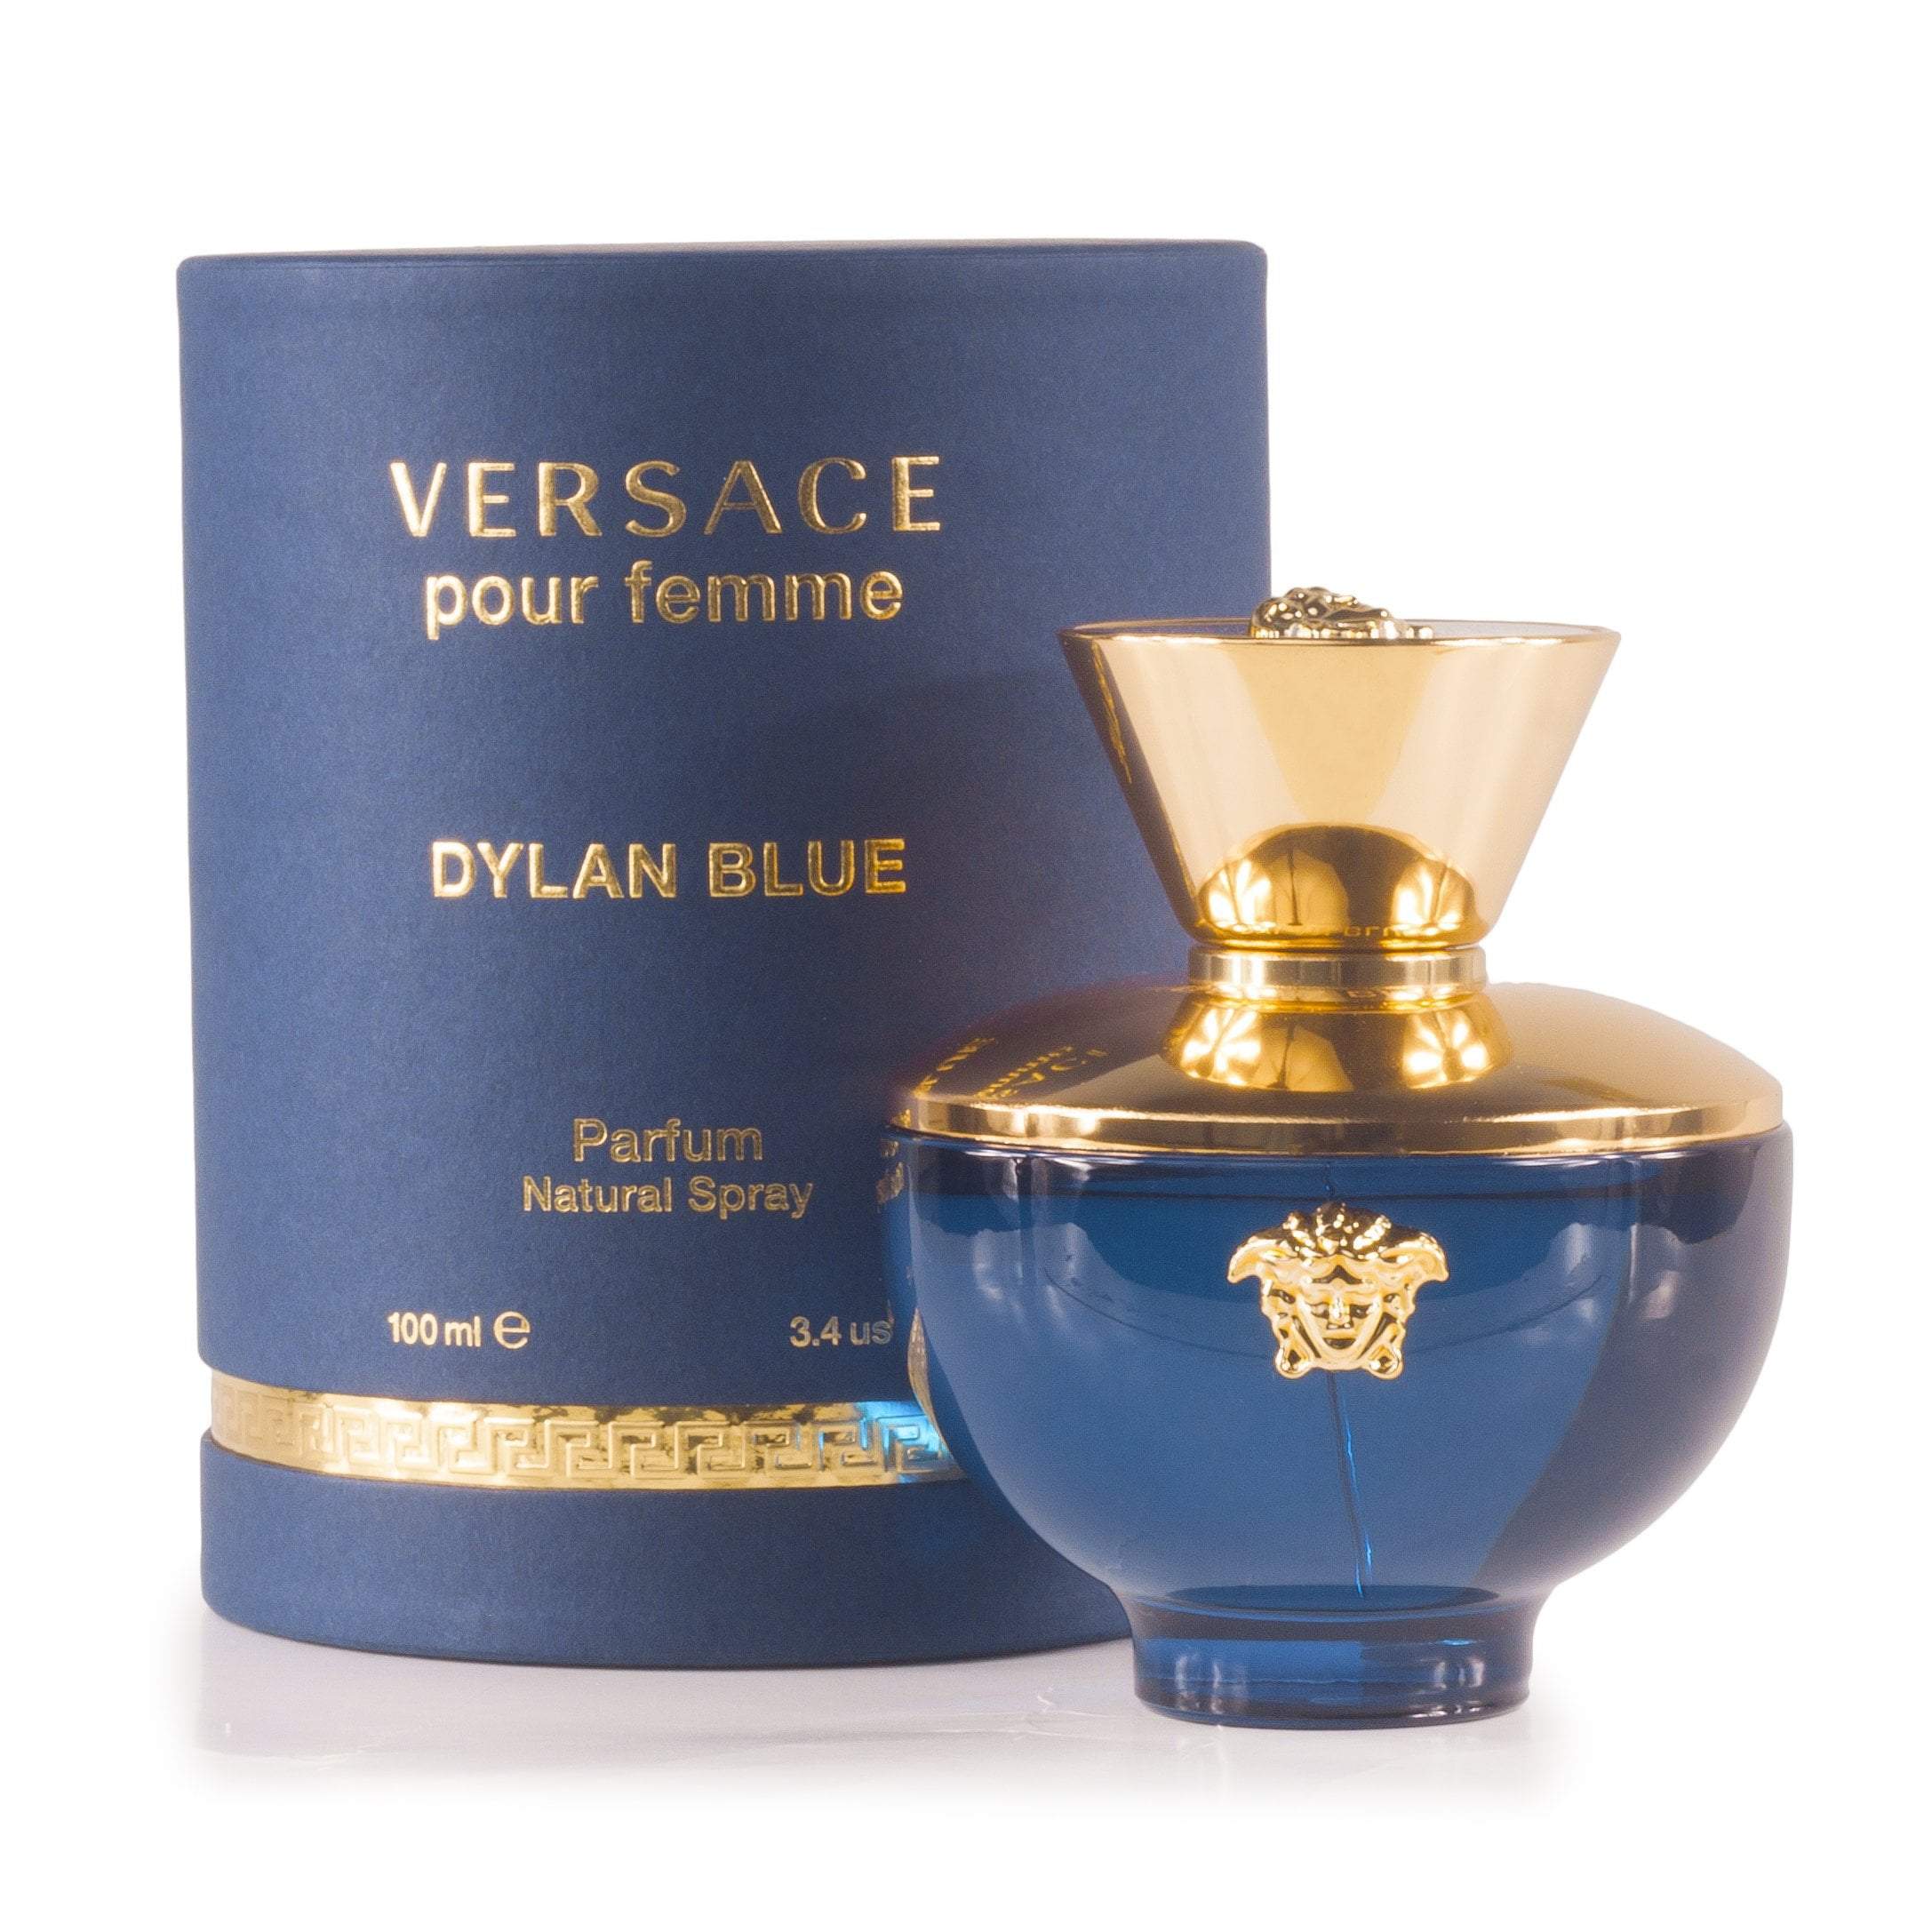 versace dylan blue perfume & cologne